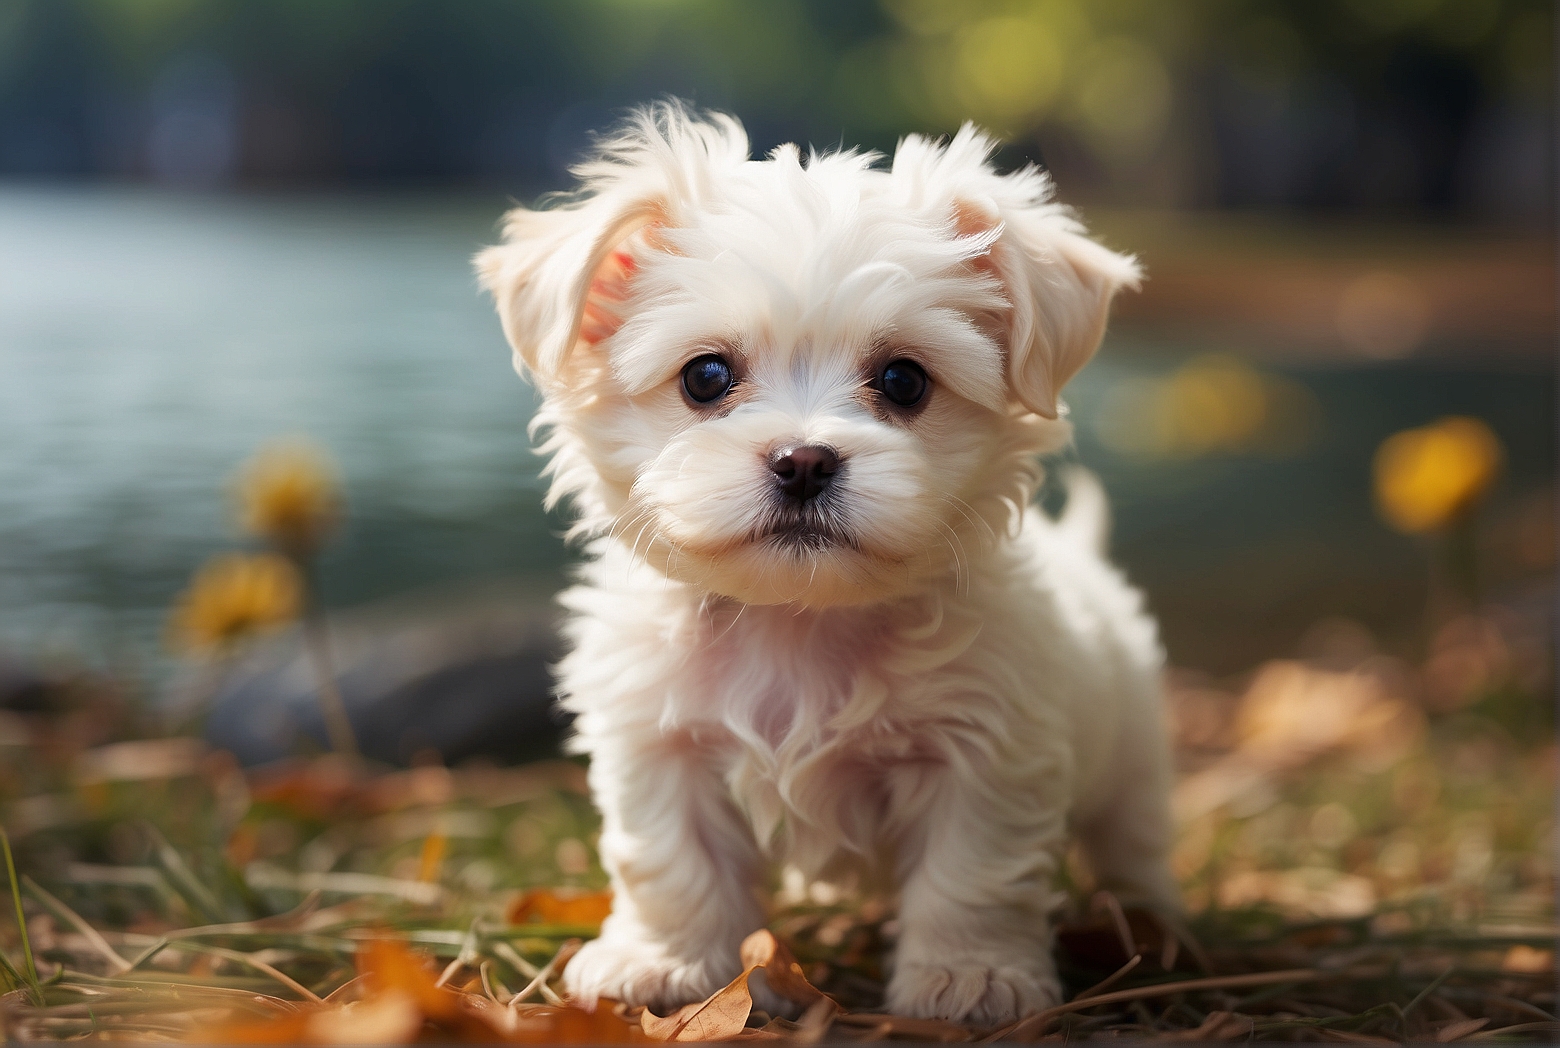 How much is a Maltese puppy?